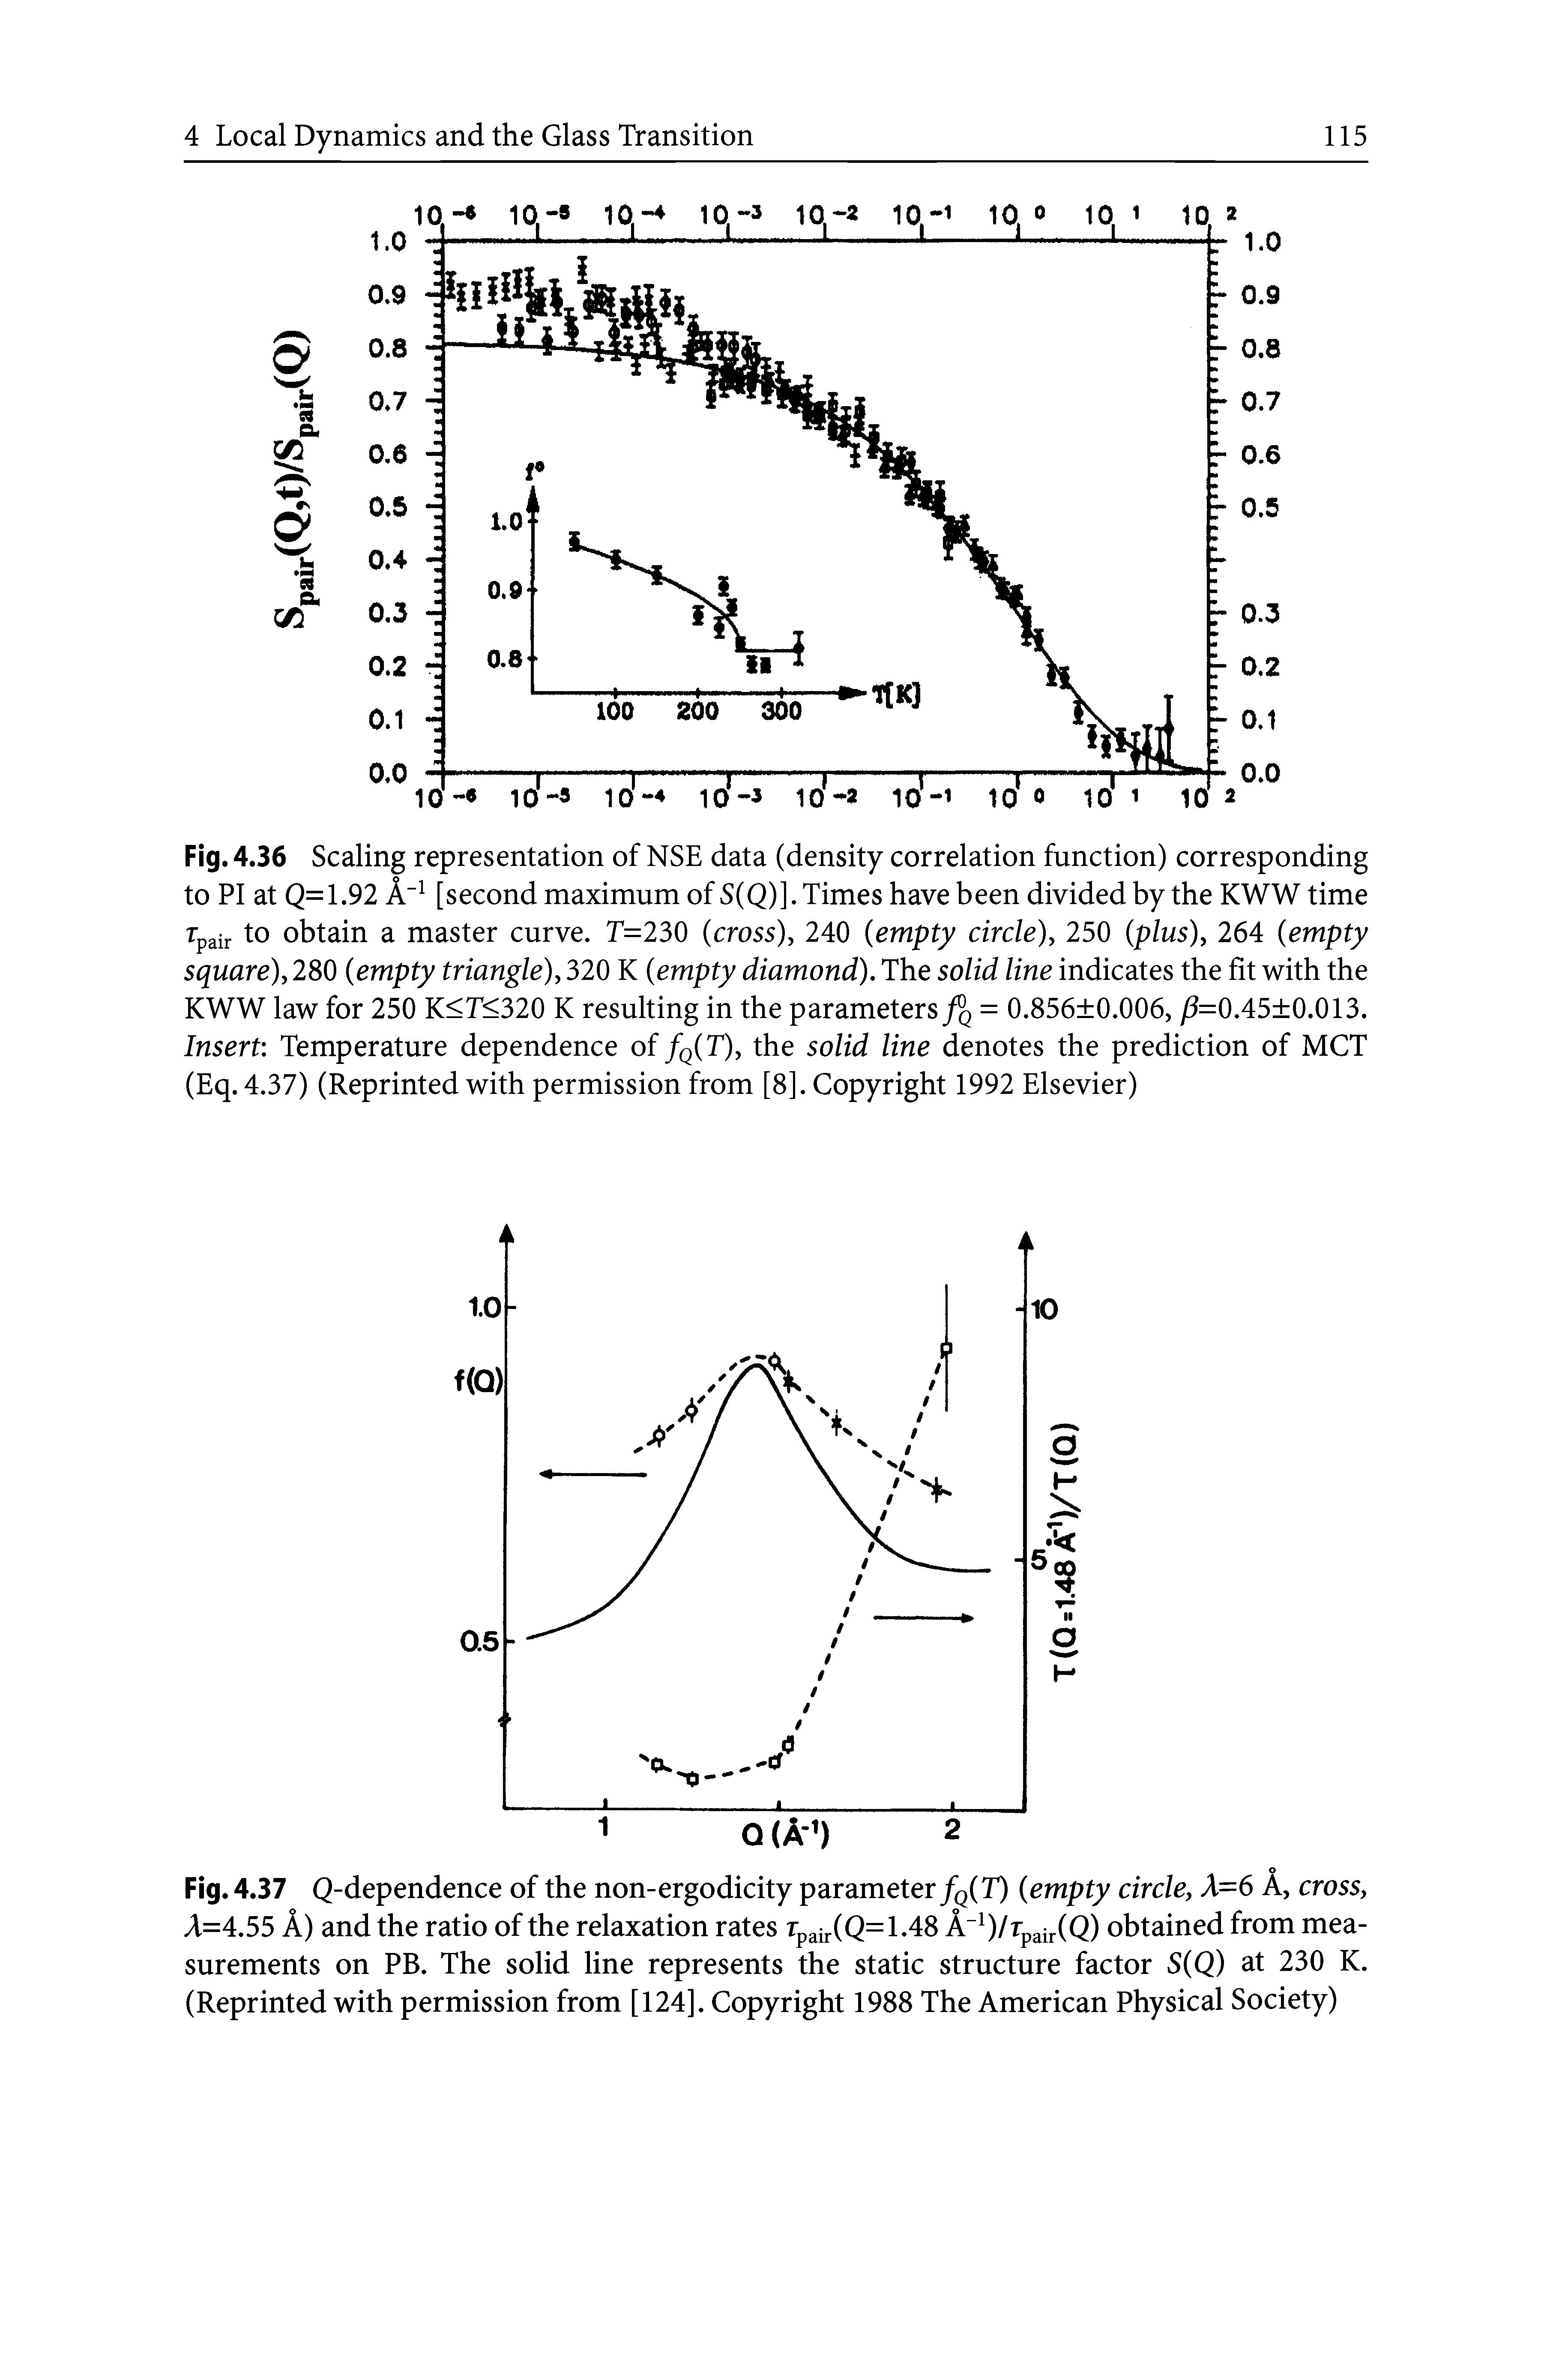 Fig. 4.36 Scaling representation of NSE data (density correlation function) corresponding to PI at Q=1.92 A [second maximum of S(Q)]. Times have been divided by the KWW time Tpair to obtain a master curve. T=230 (cross), 240 (empty circle), 250 (plus), 264 (empty square), 280 (empty triangle), 320 K (empty diamond). The solid line indicates the fit with the KWW law for 250 K<T<320 K resulting in the parameters/ = 0.856 0.006, =0.45 0.013. Insert Temperature dependence of/q(T), the solid line denotes the prediction of MCT (Eq. 4.37) (Reprinted with permission from [8]. Copyright 1992 Elsevier)...